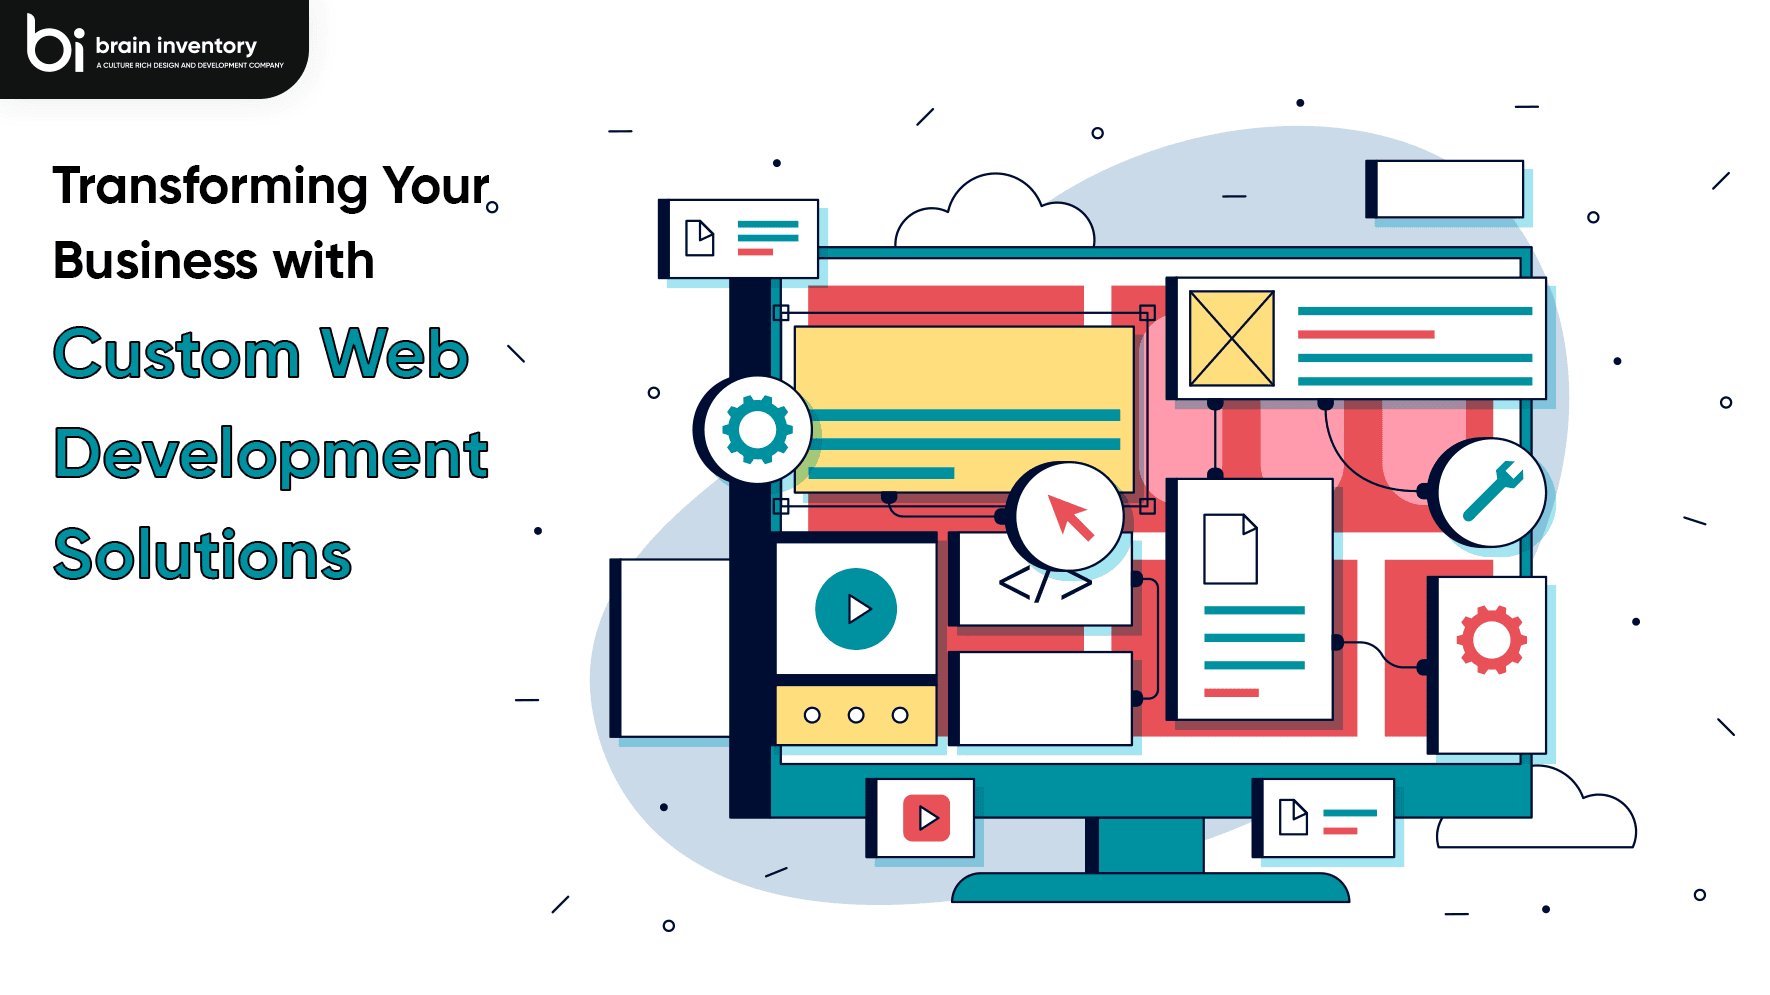 Transforming Your Business with Custom Web Development Solutions